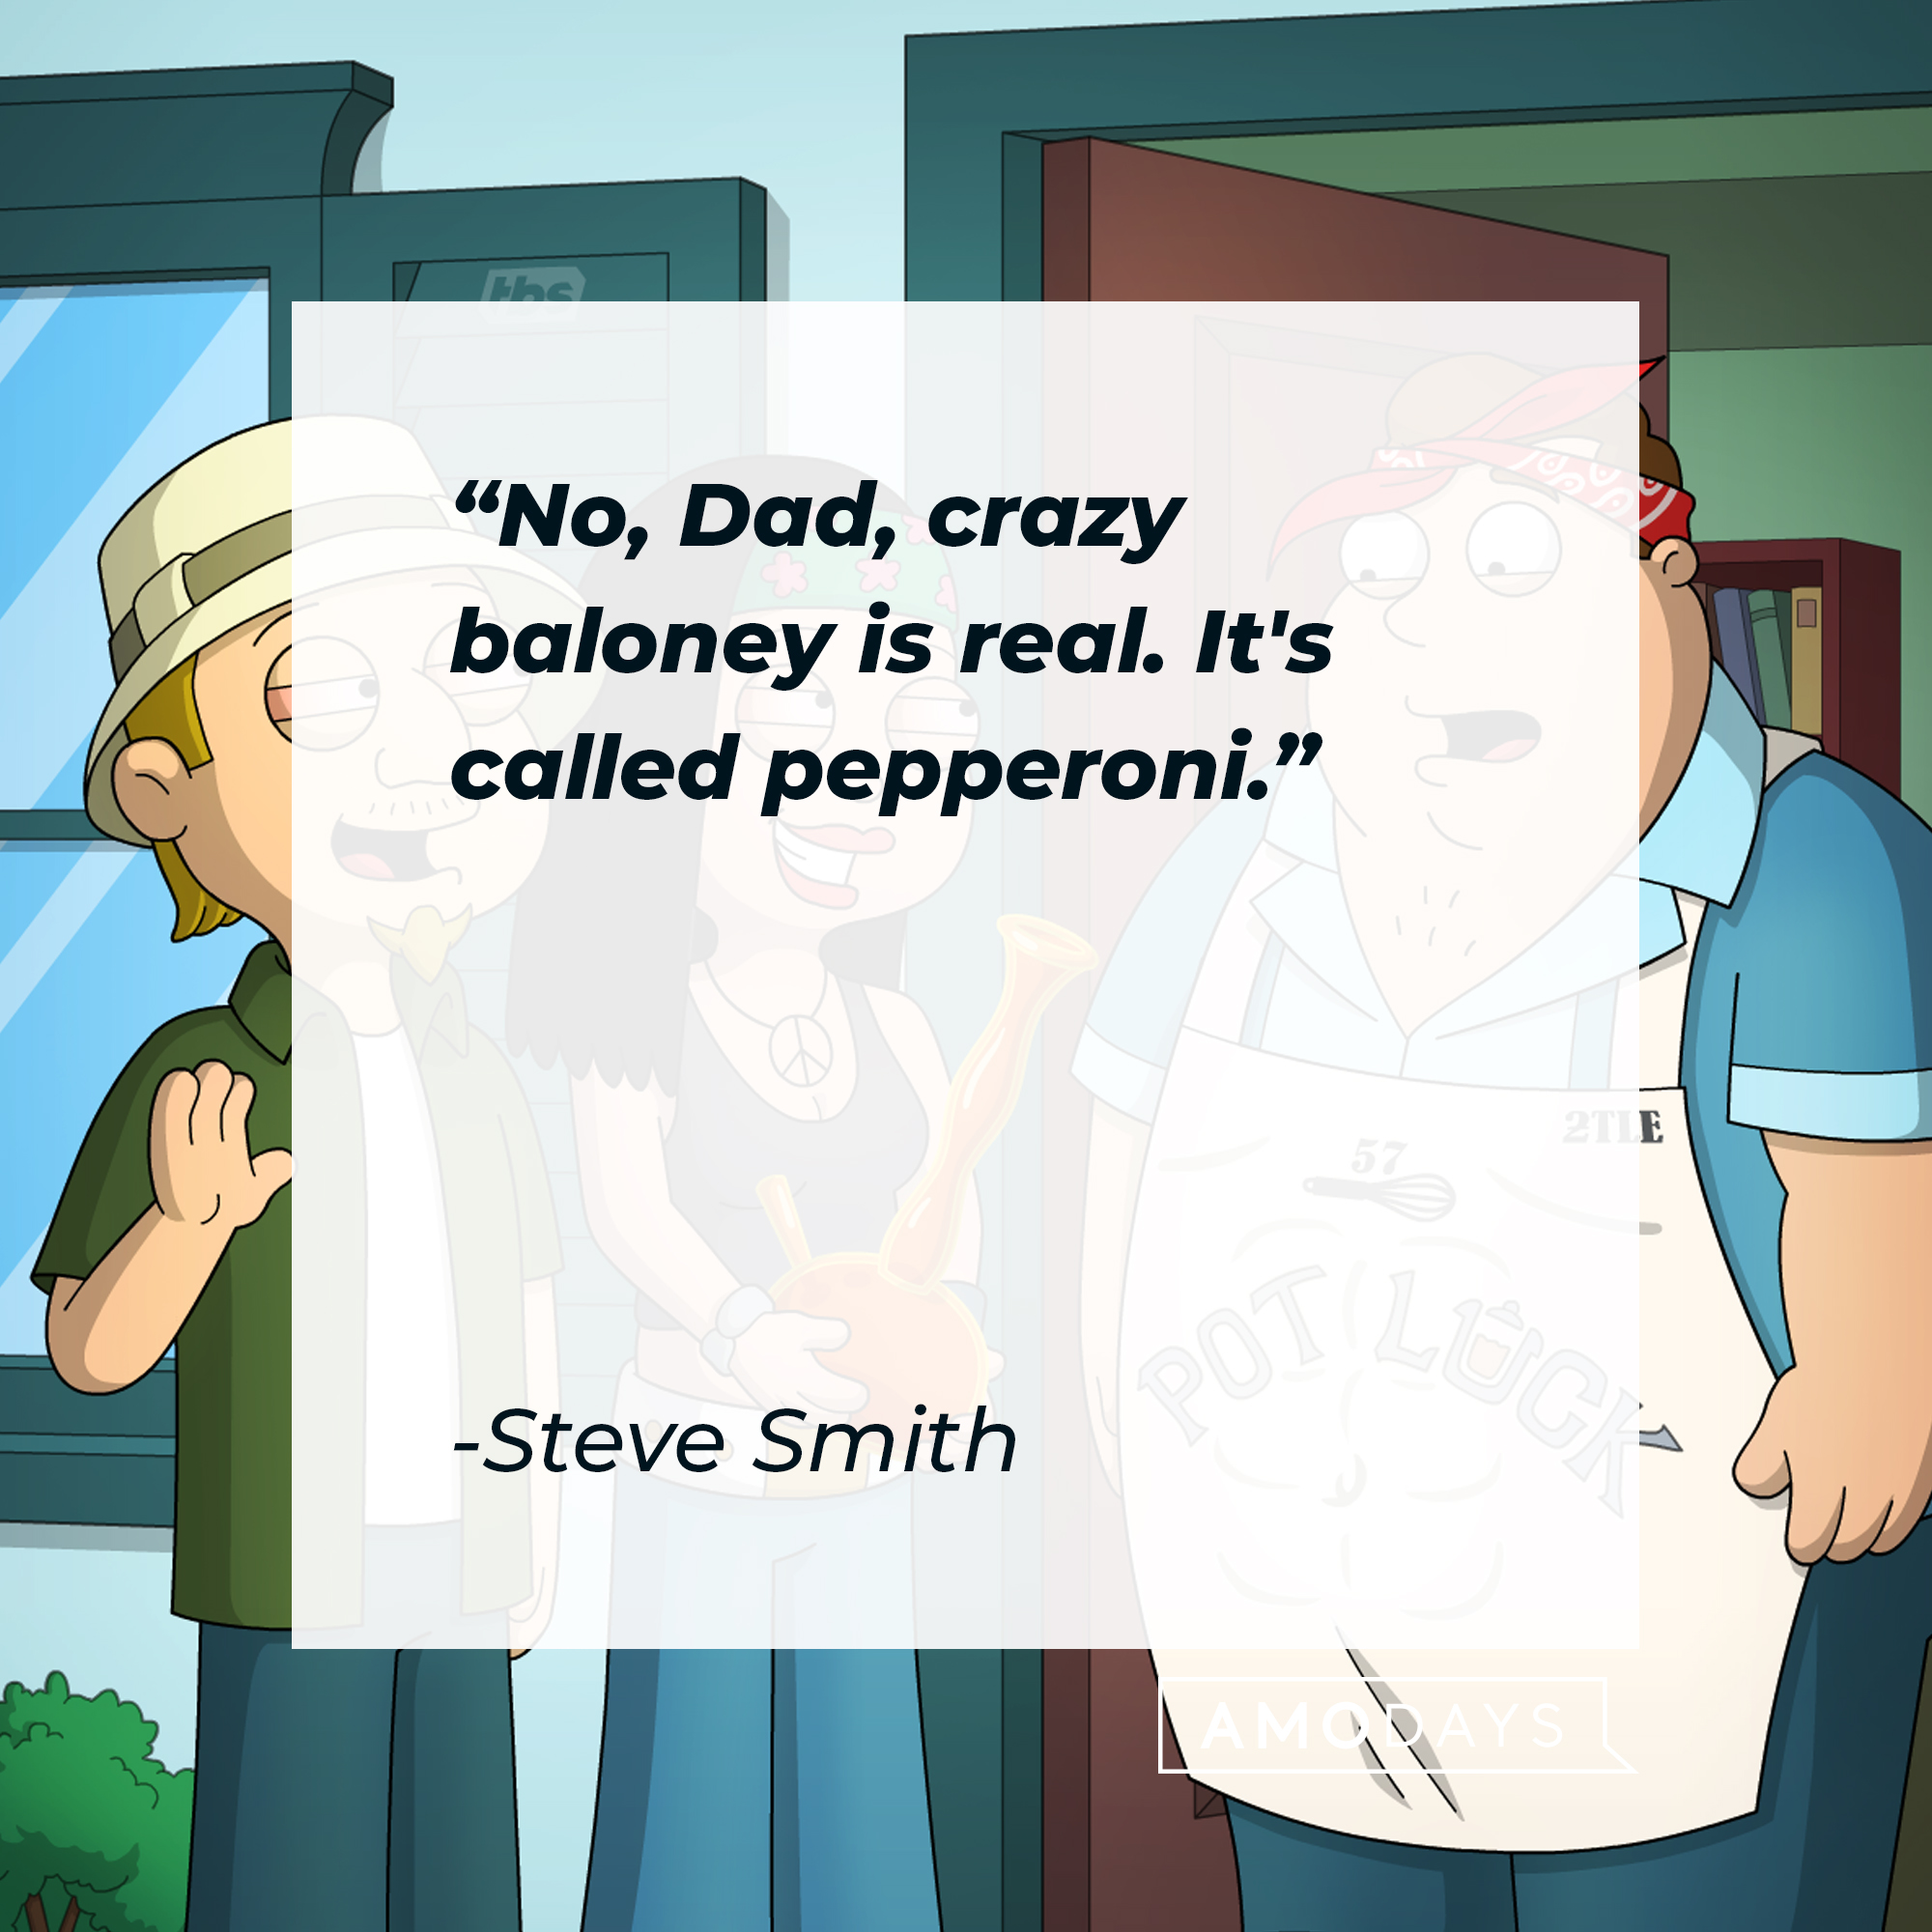 Steve Smith's quote: "No, Dad, crazy baloney is real. It's called pepperoni." | Source: facebook.com/AmericanDad